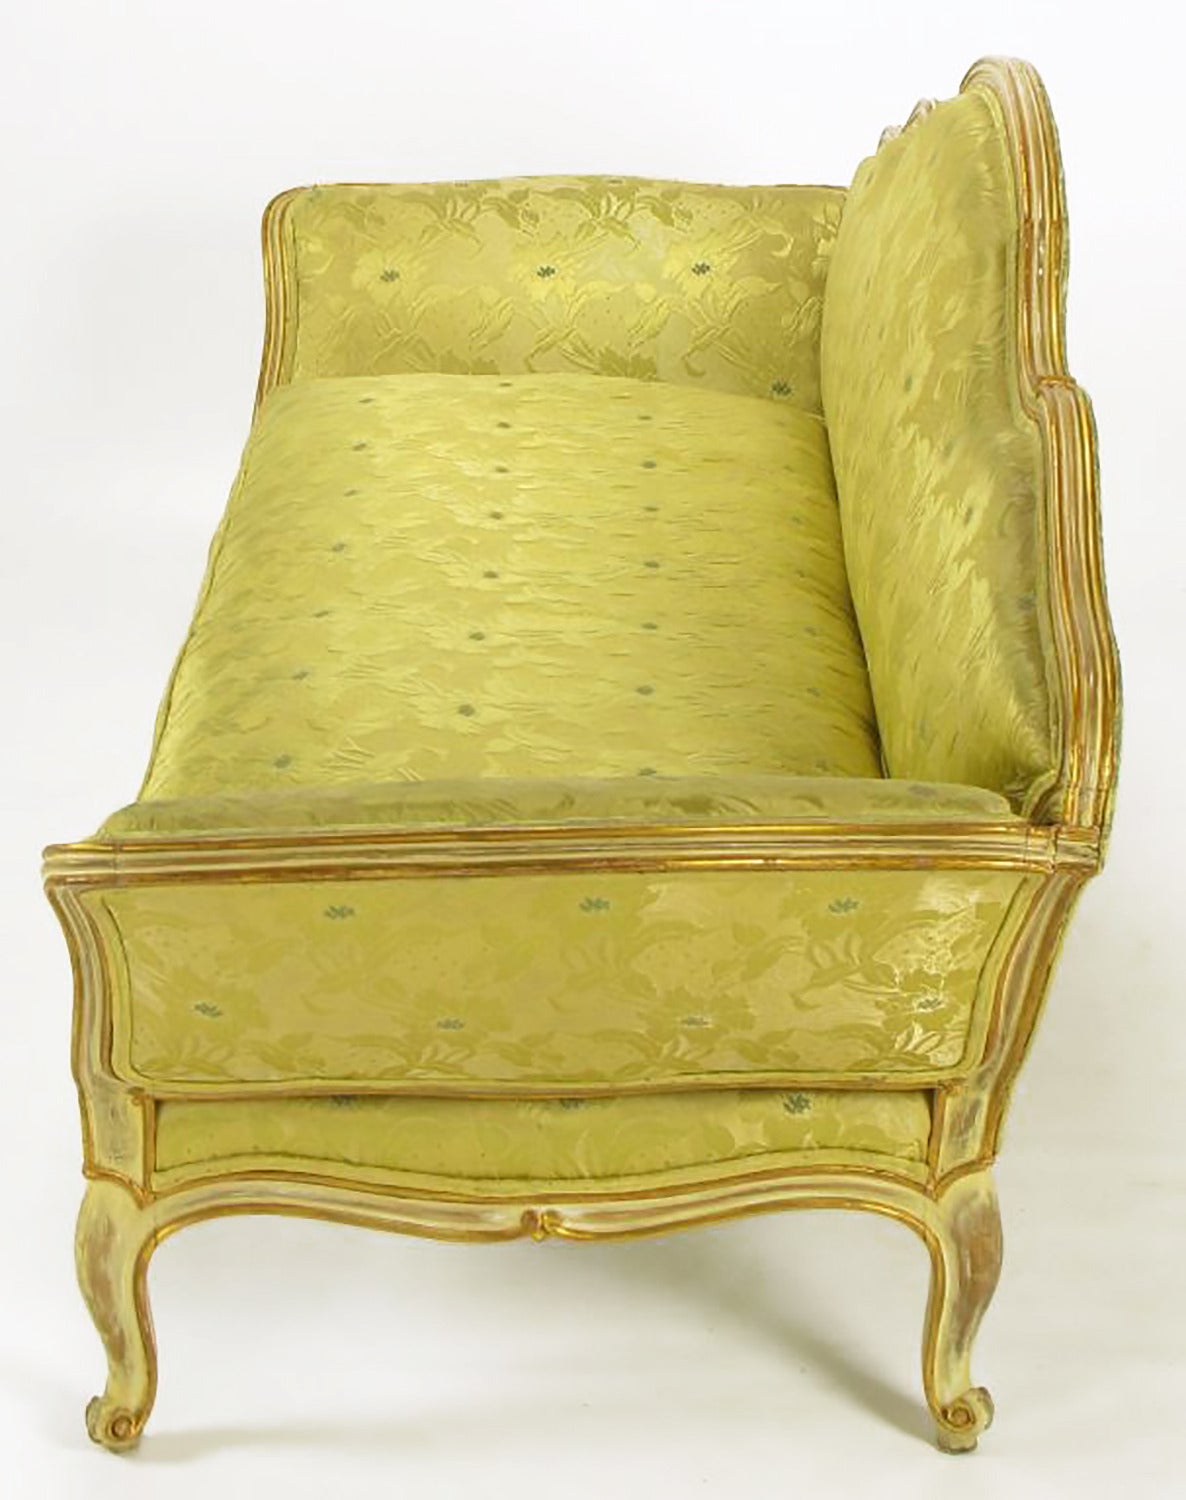 19th Century Stunning Painted and Parcel-Gilt Italian Sofa For Sale